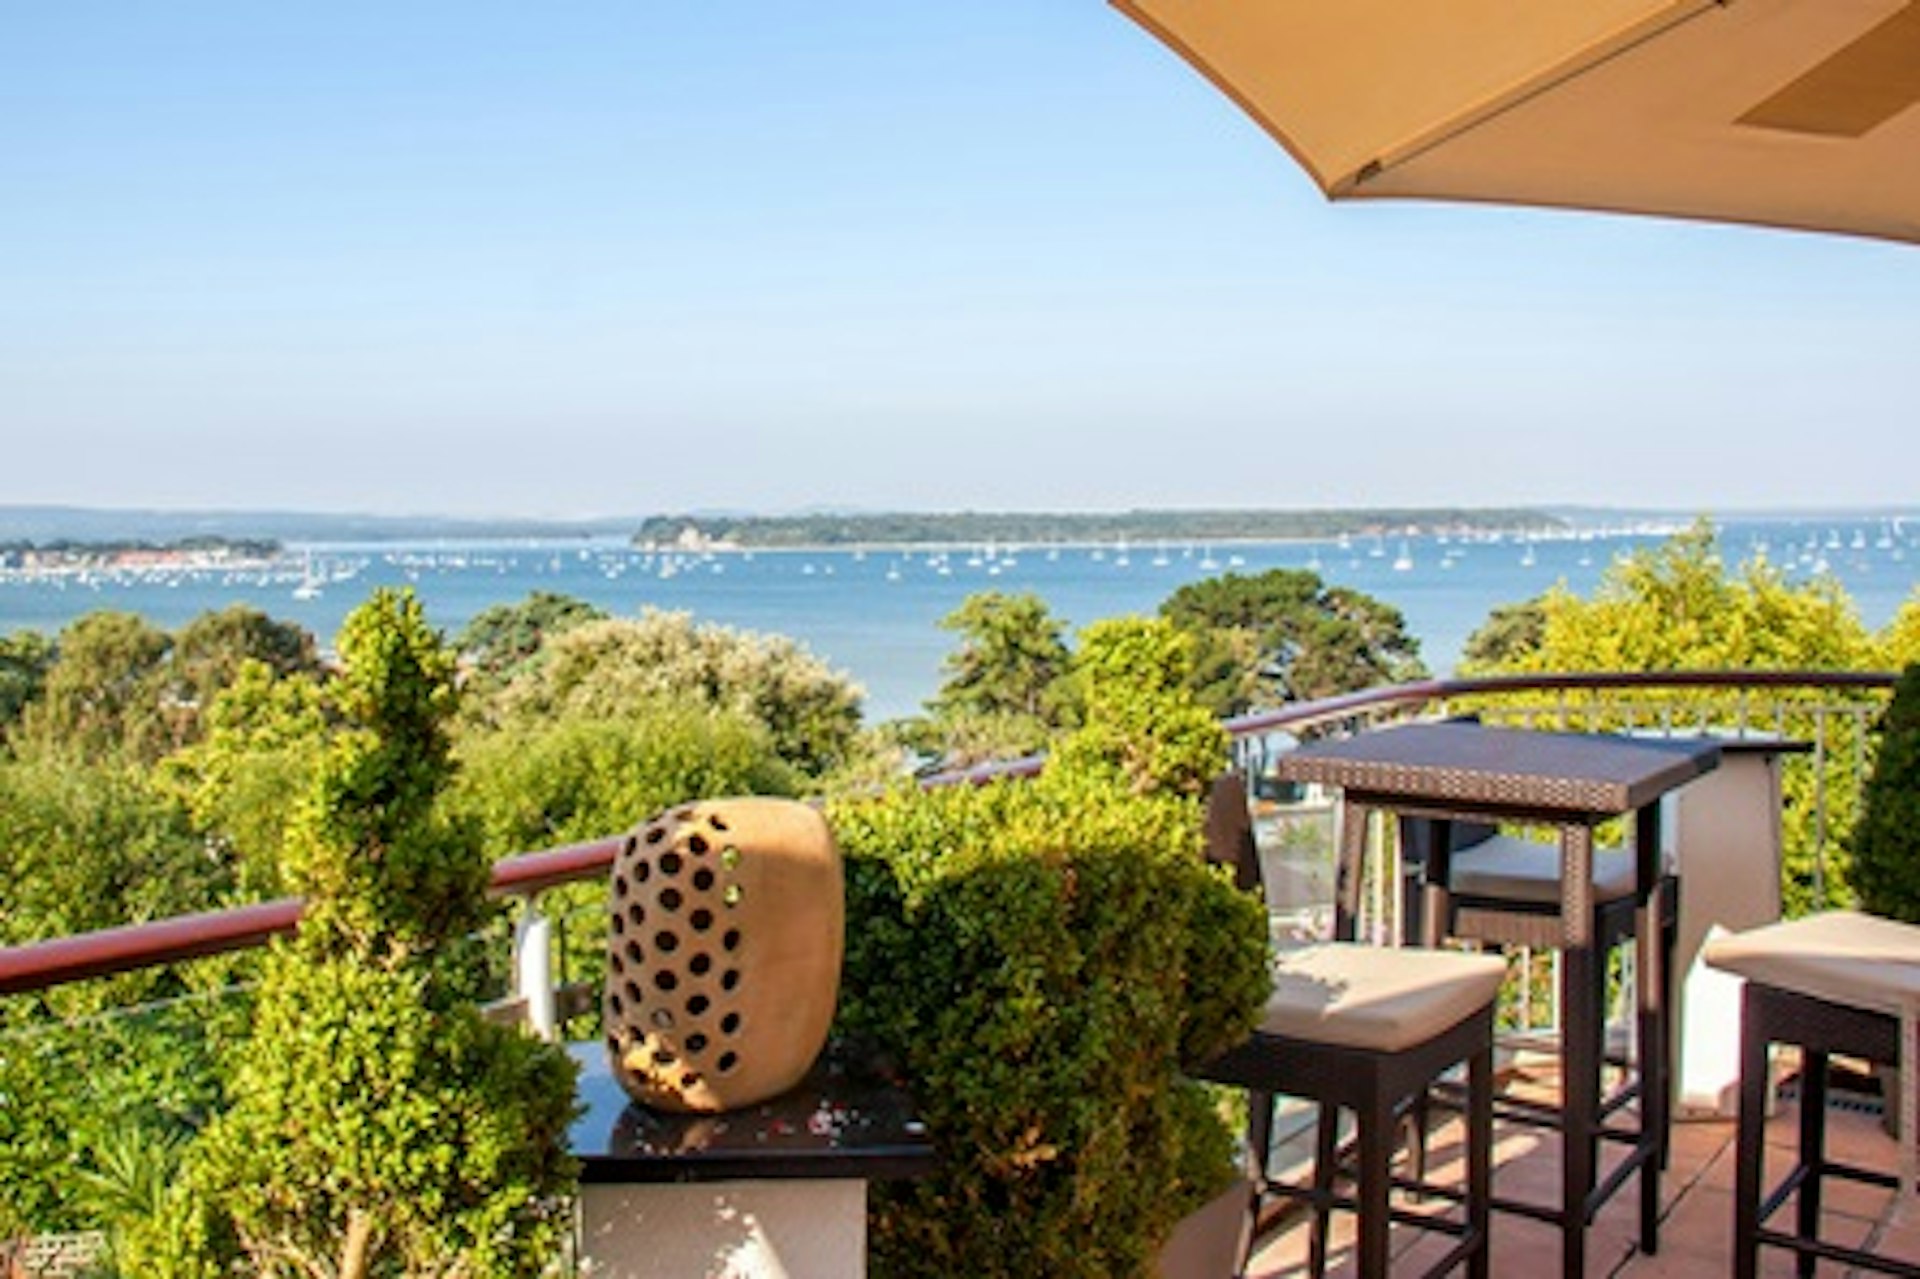 Two Night Coastal Break for Two at the 4* Harbour Heights Hotel, Poole 3